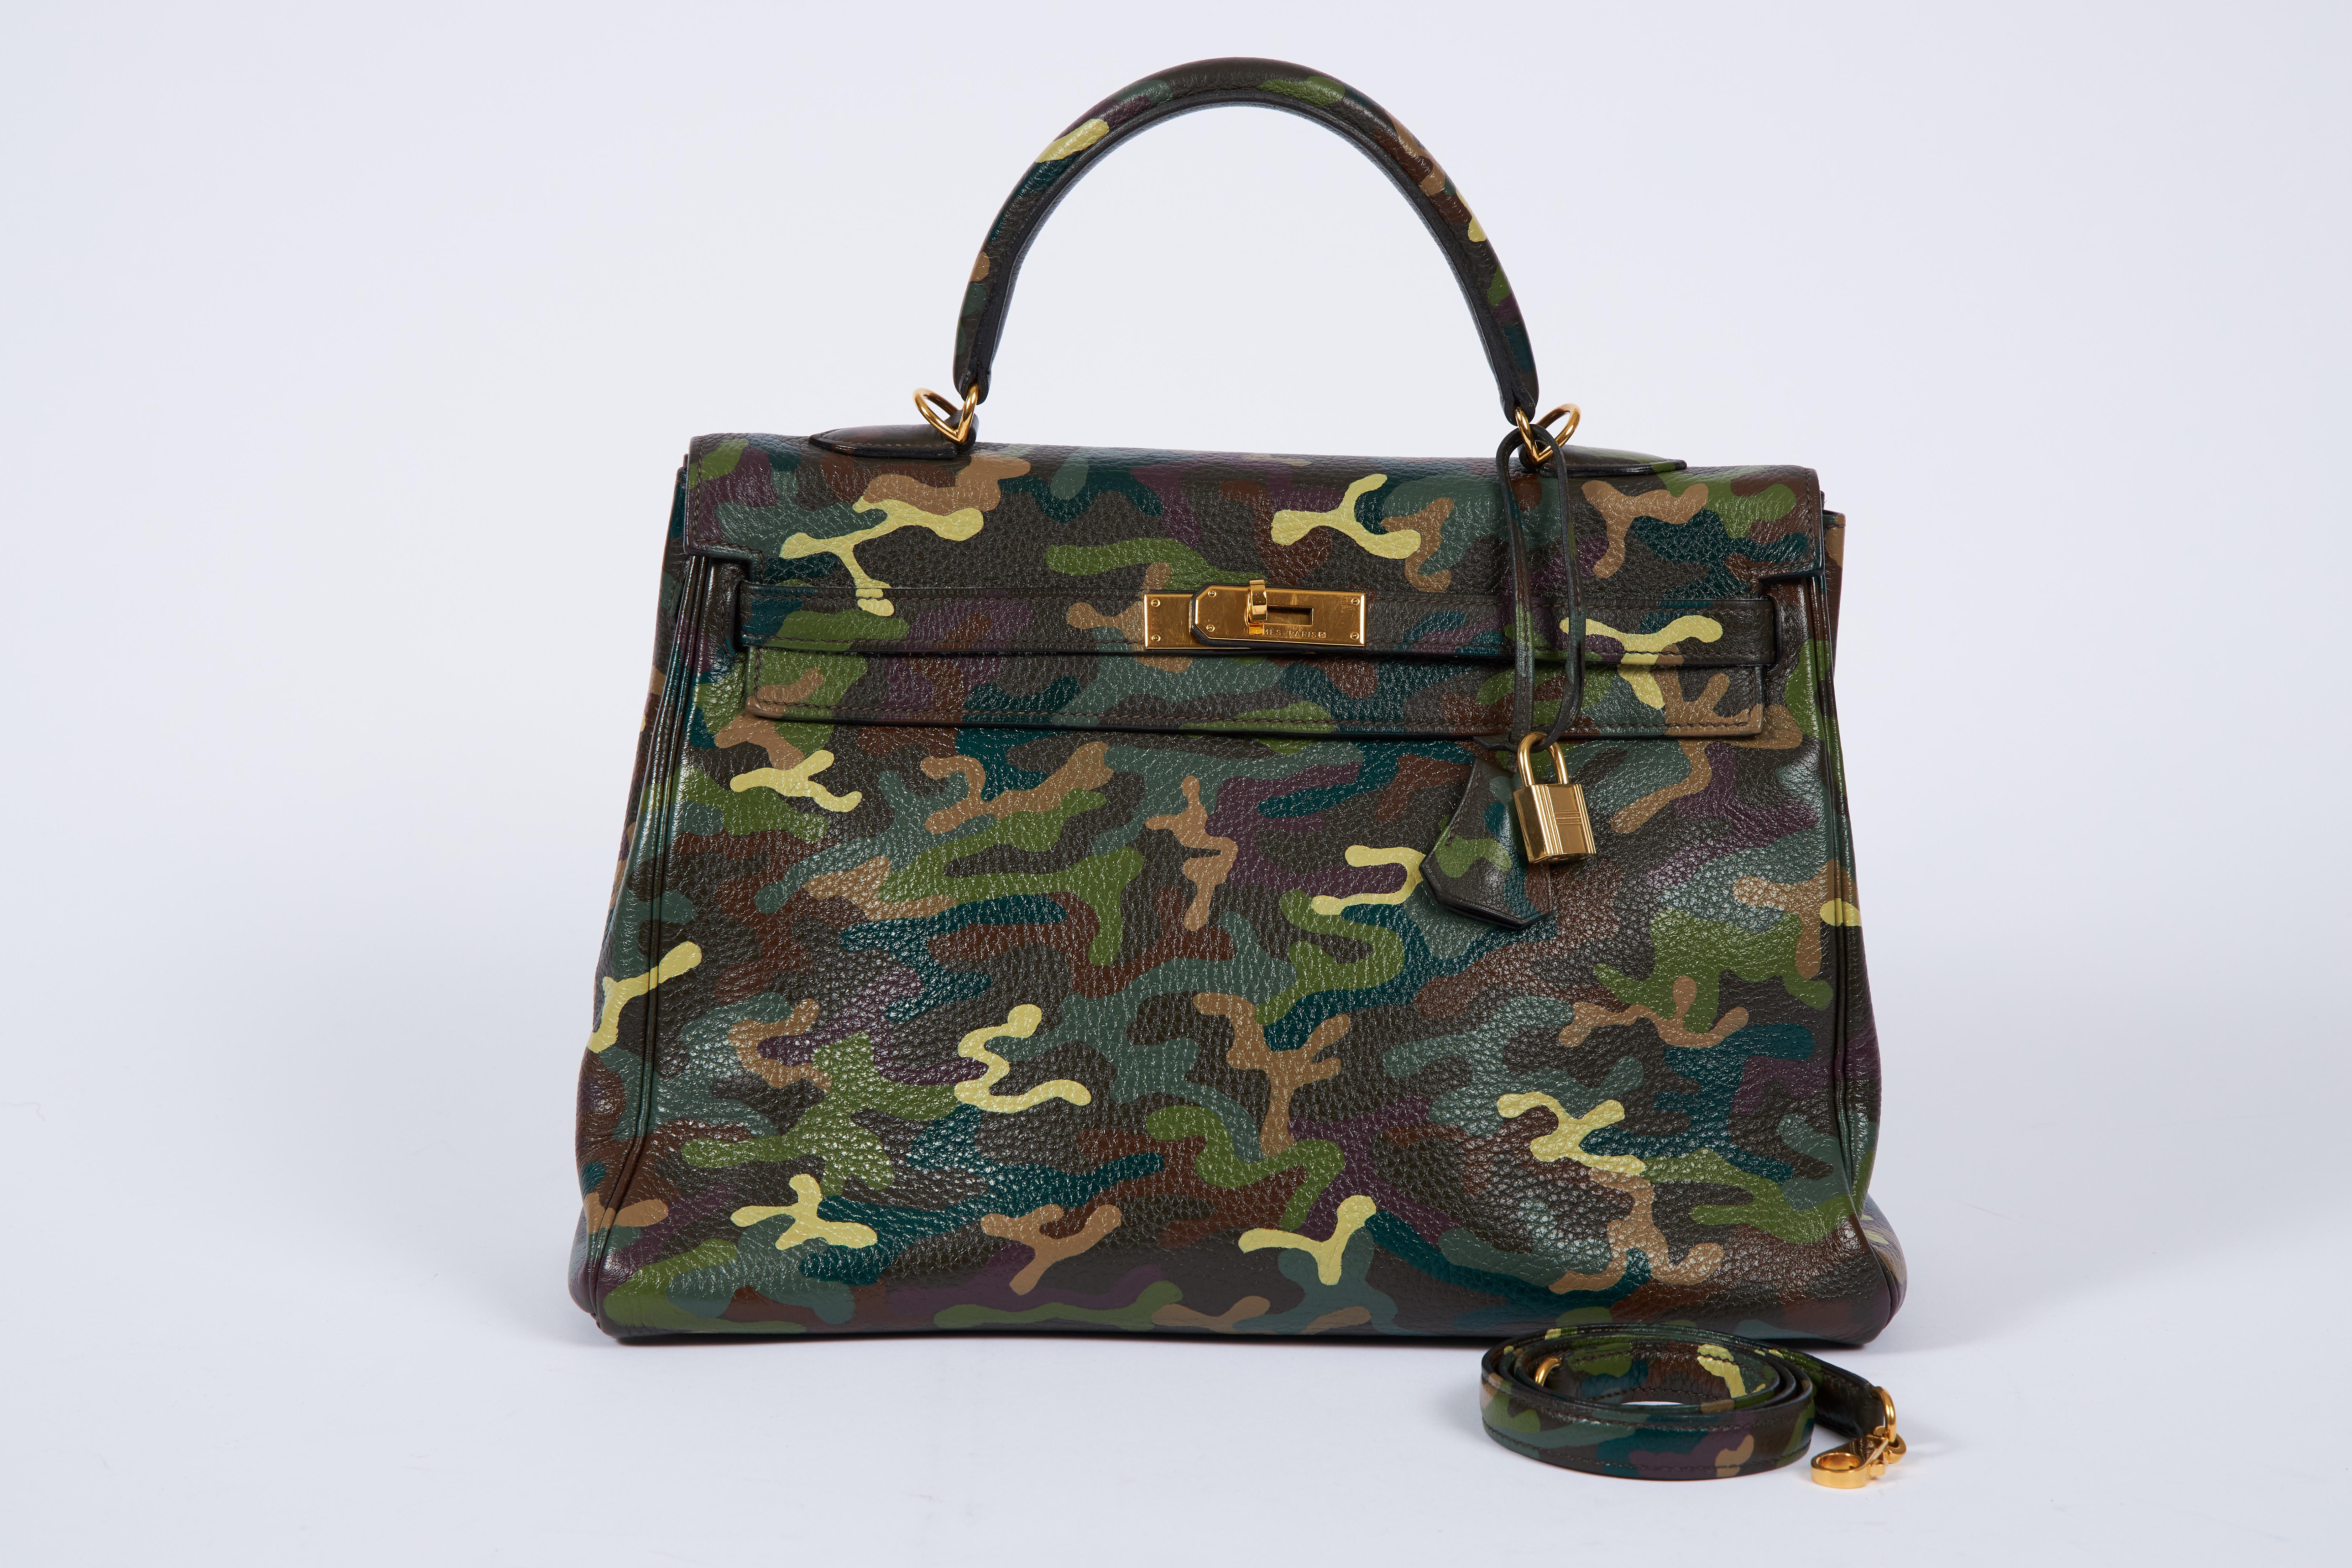 Hermes kelly bag 35 cm retourne in olive green clemence leather and gold tone hardware. One of a kind hand painted camouflage. Detachable strap, 35